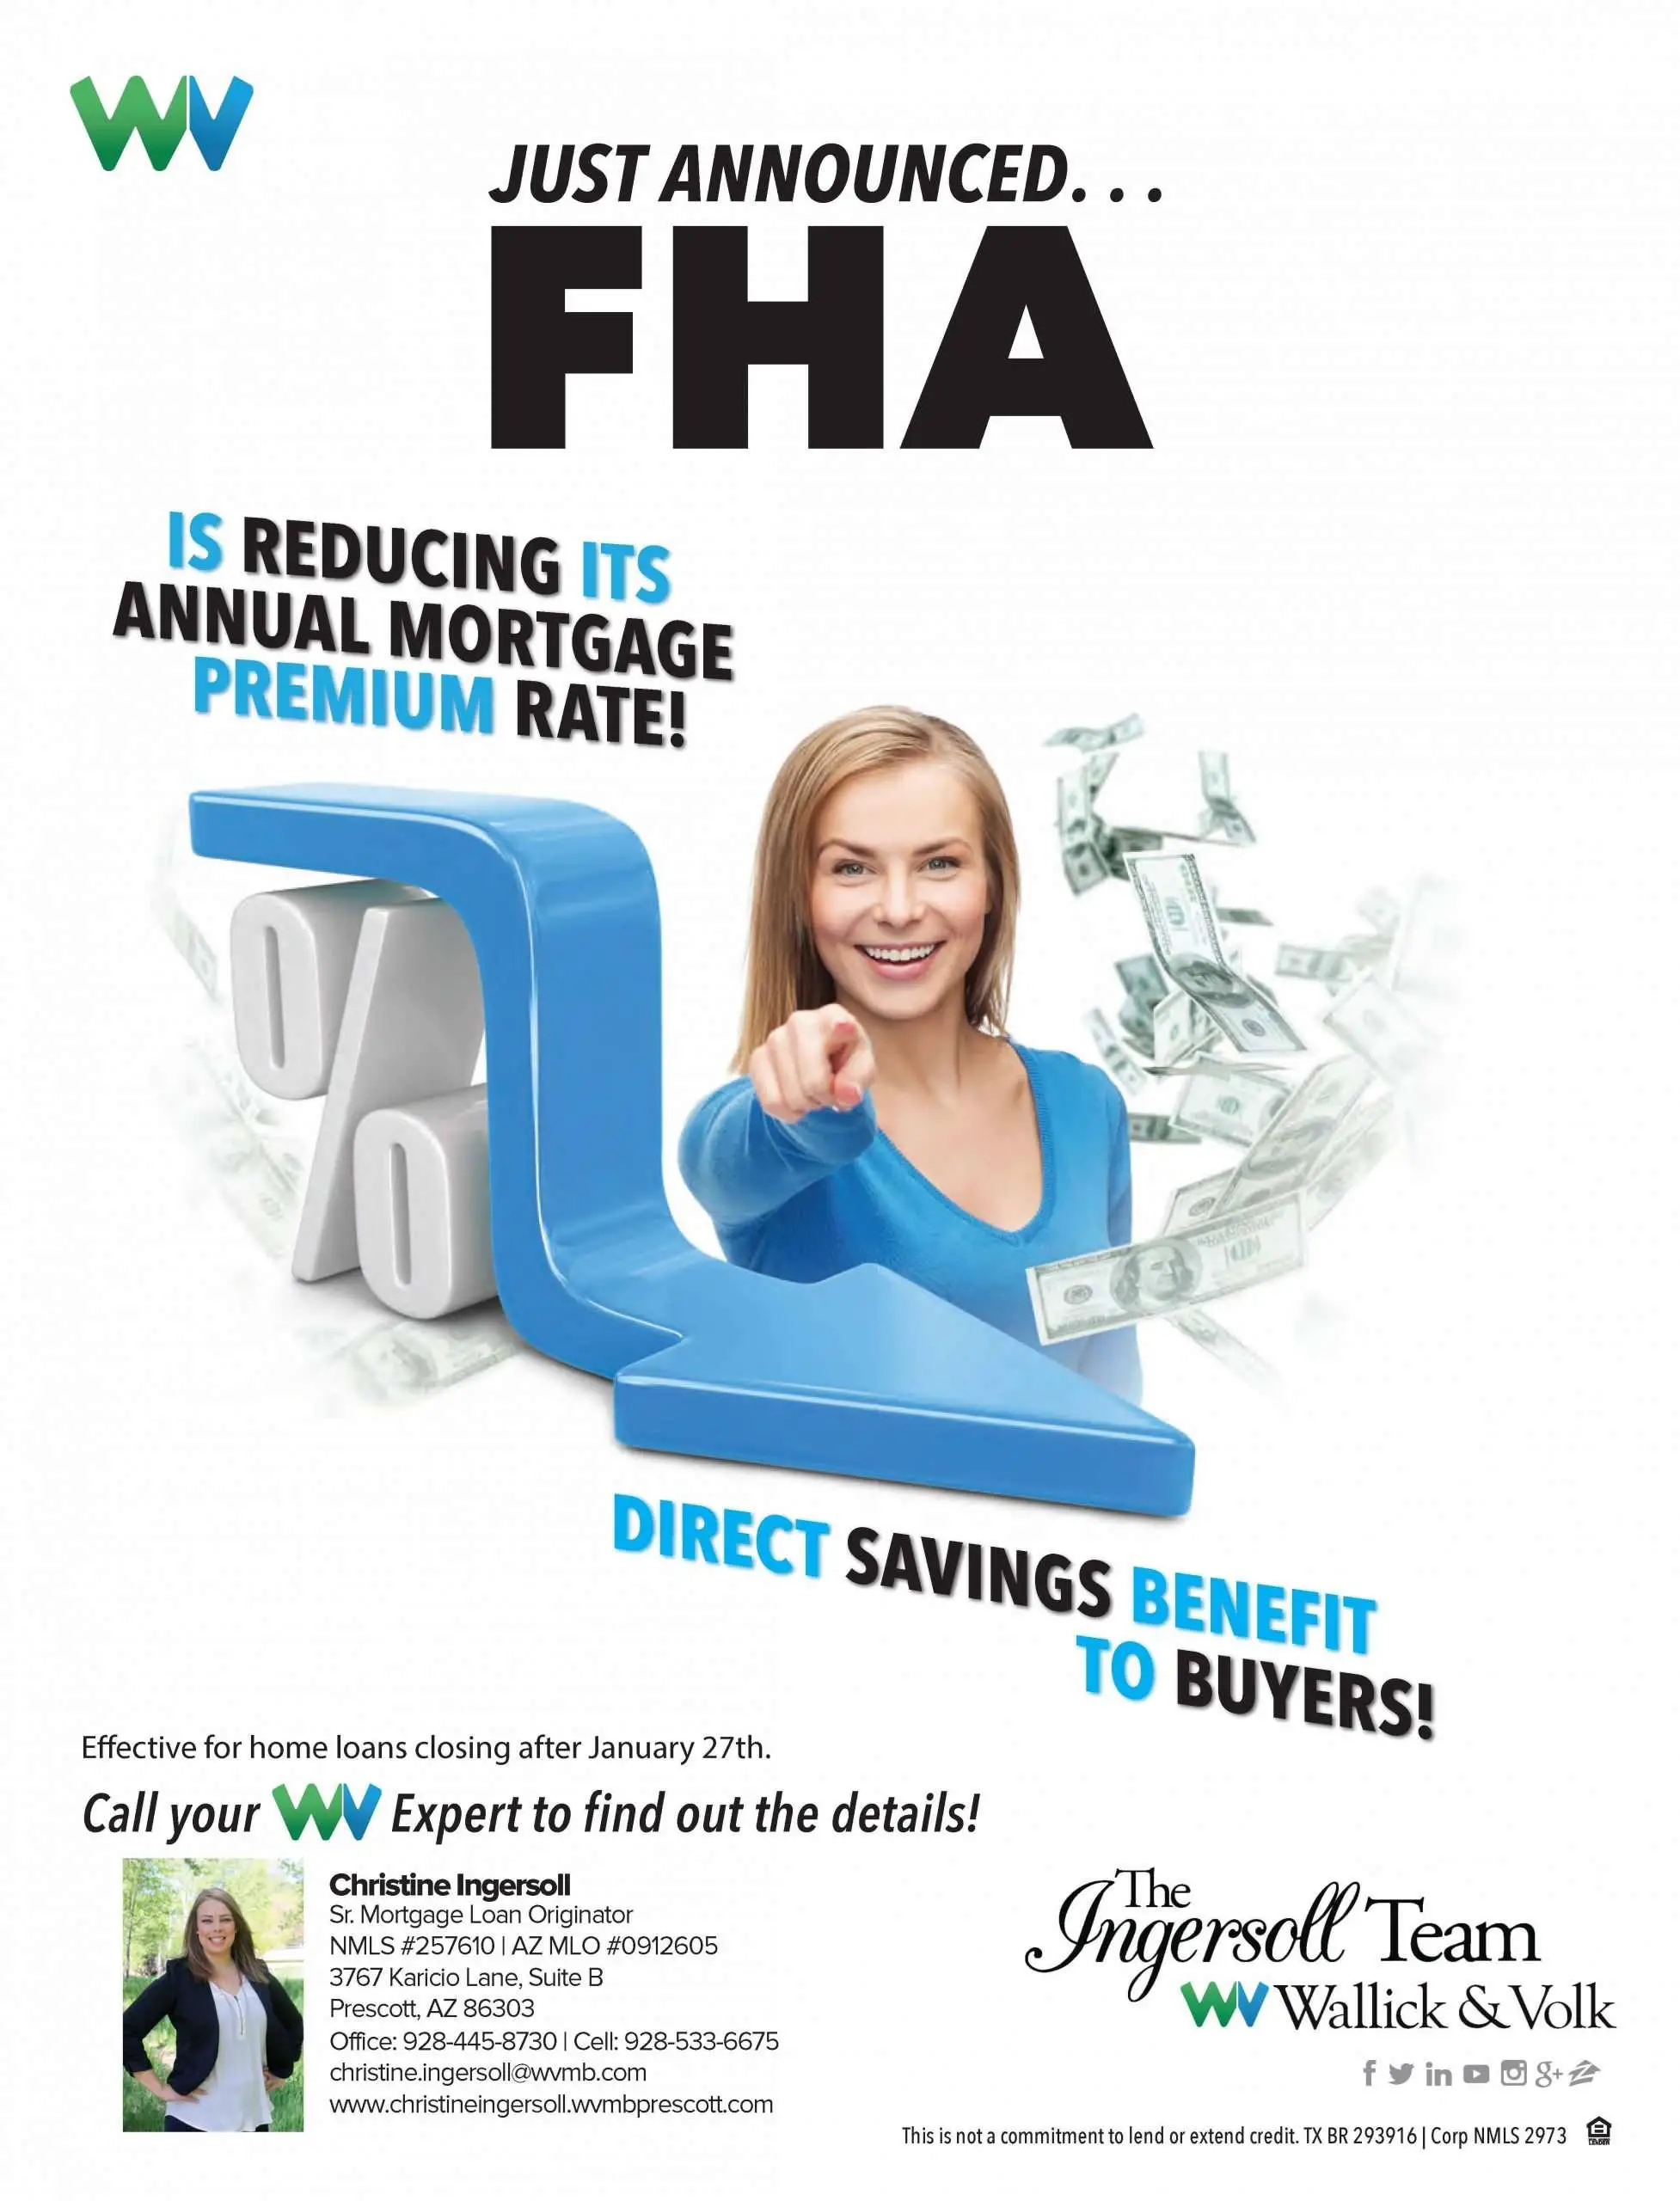 #FHA #FirstTimeHomebuyers #Mortgage